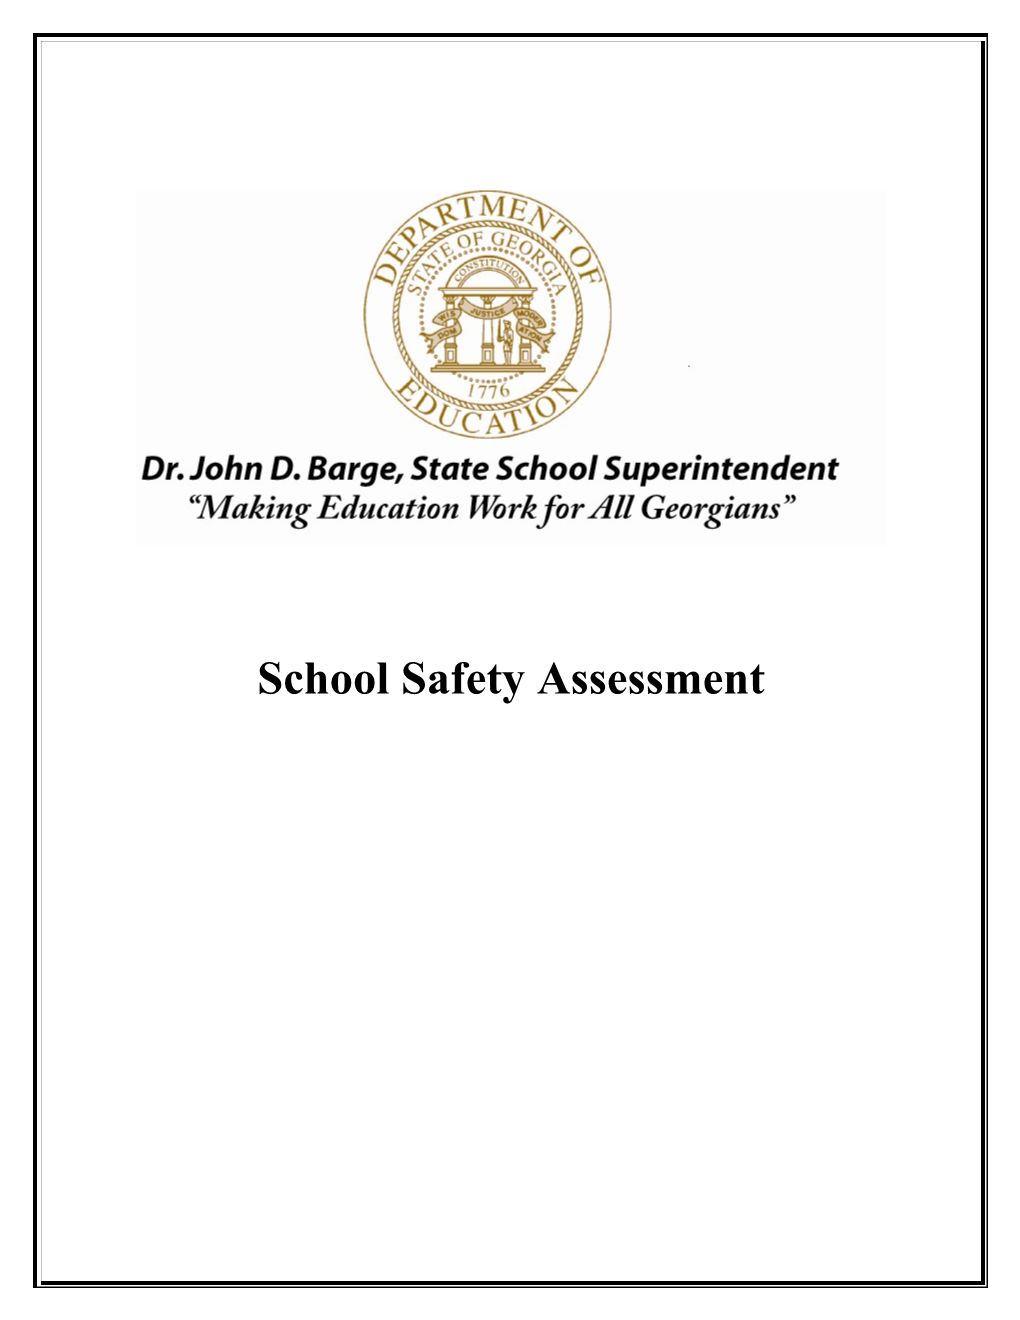 Components of the School Safety Assessment